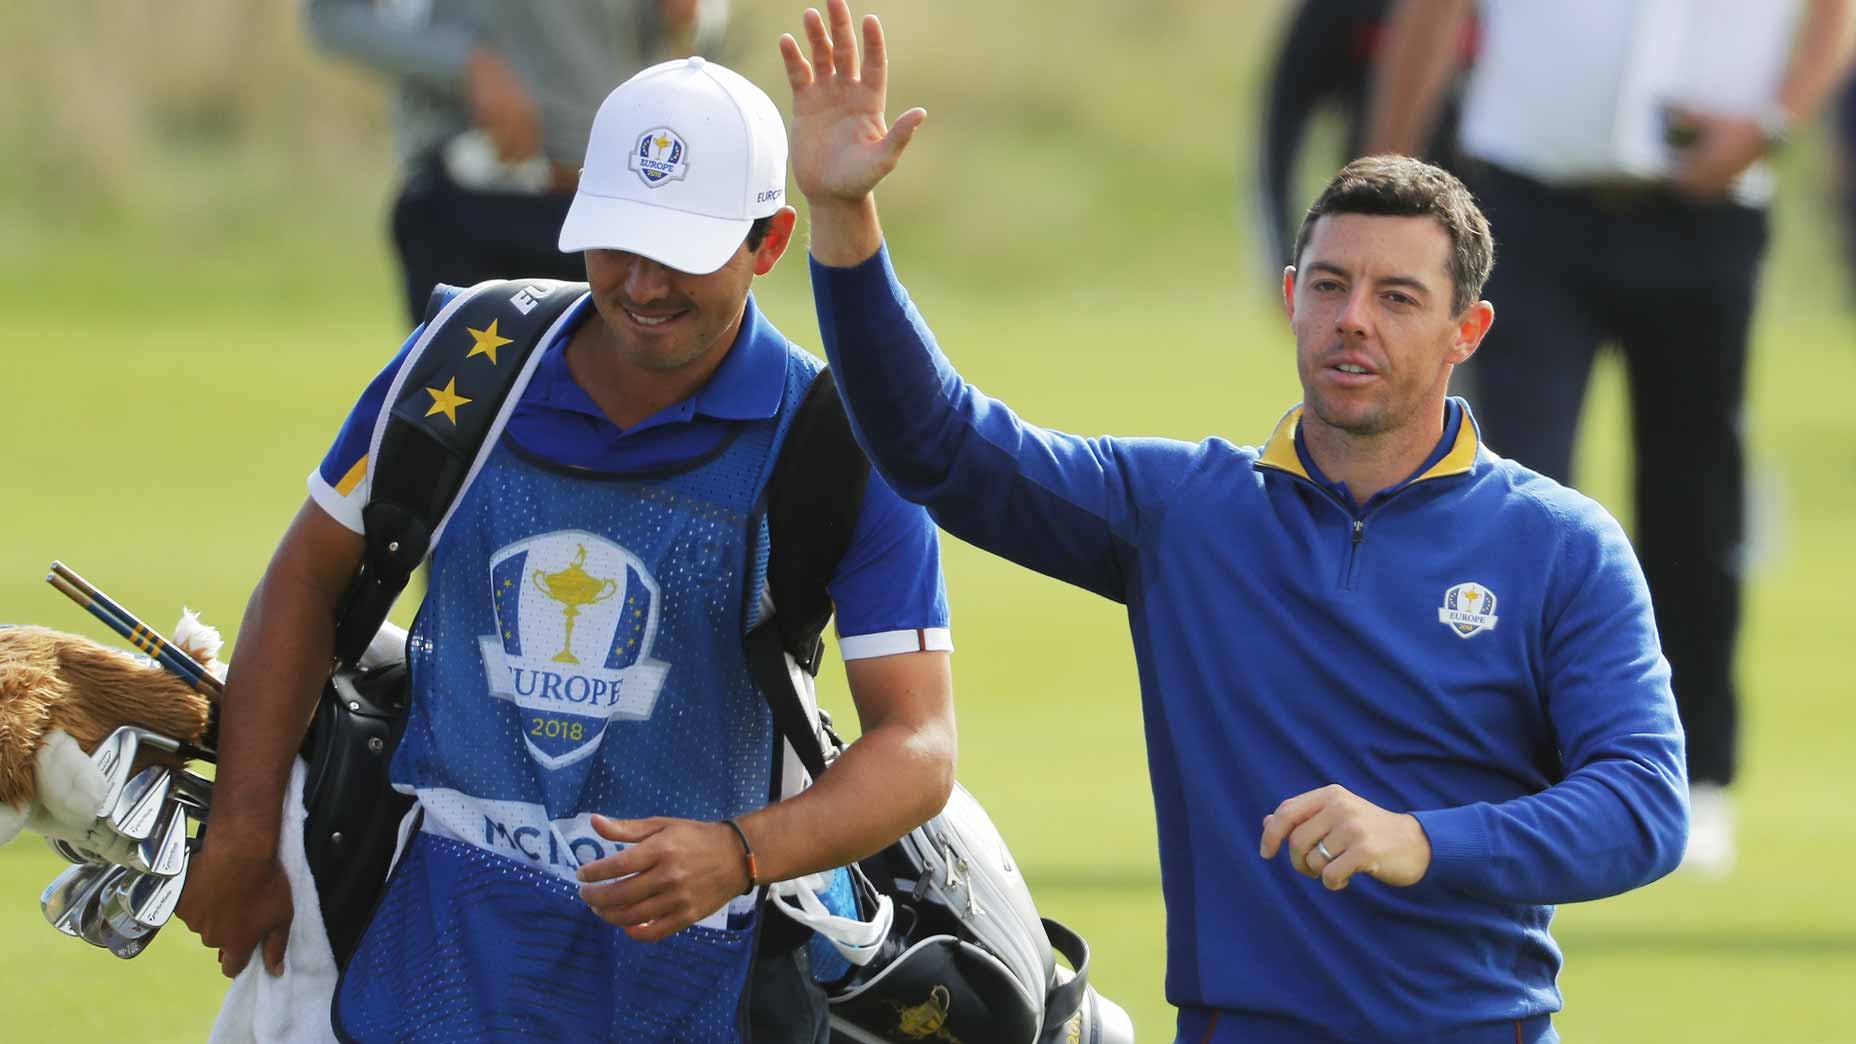 Why Rory McIlroy thinks this year's Ryder Cup will be postponed